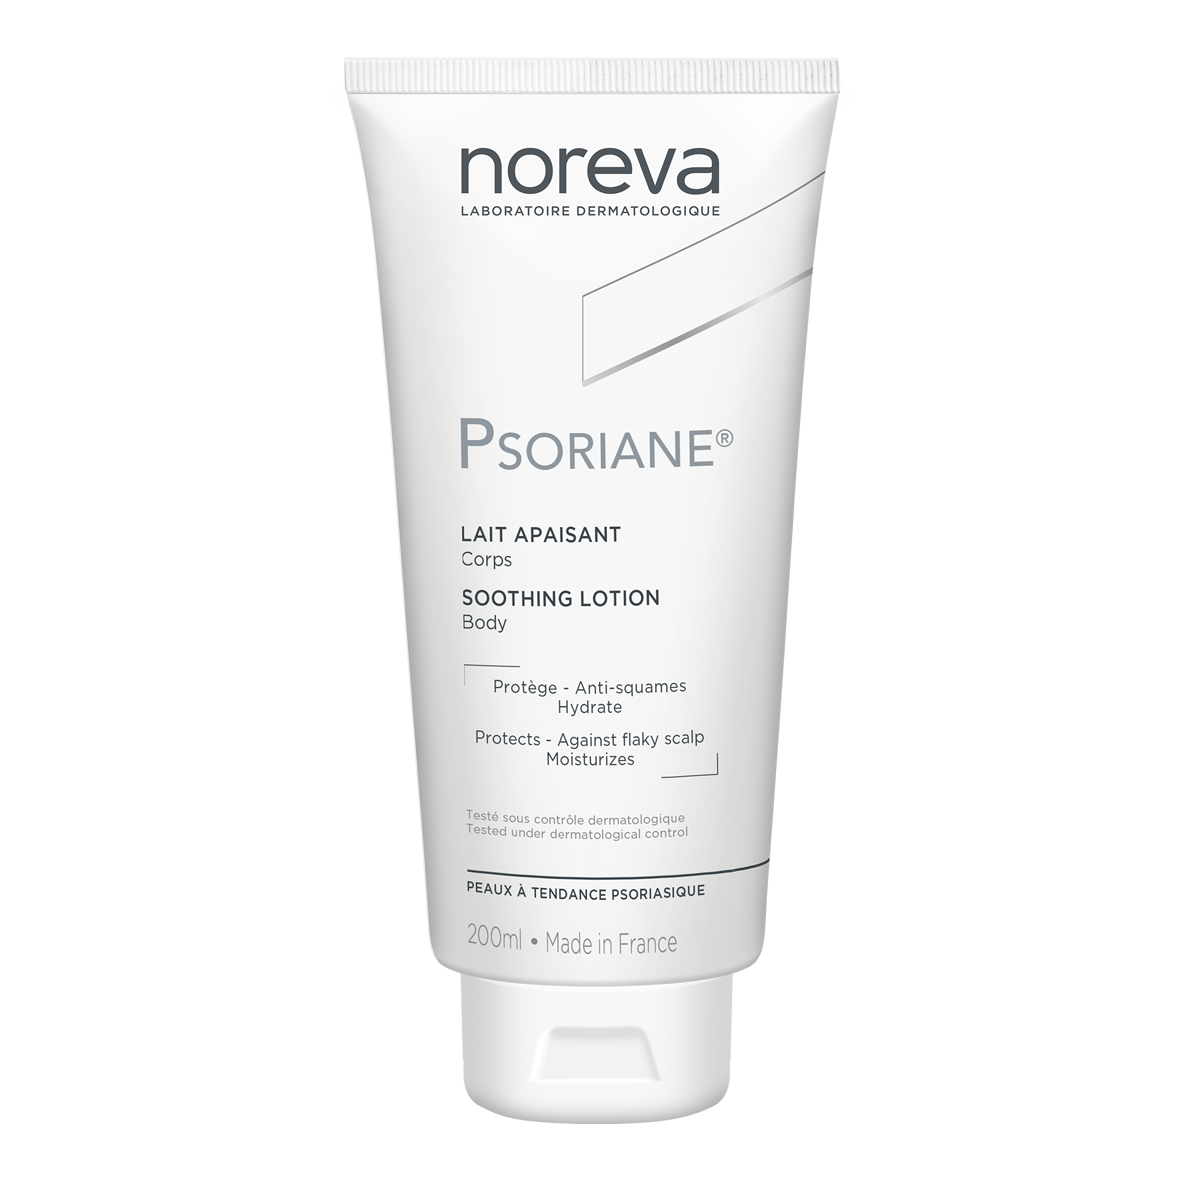 PSORIANE  SOOTHING LOTION